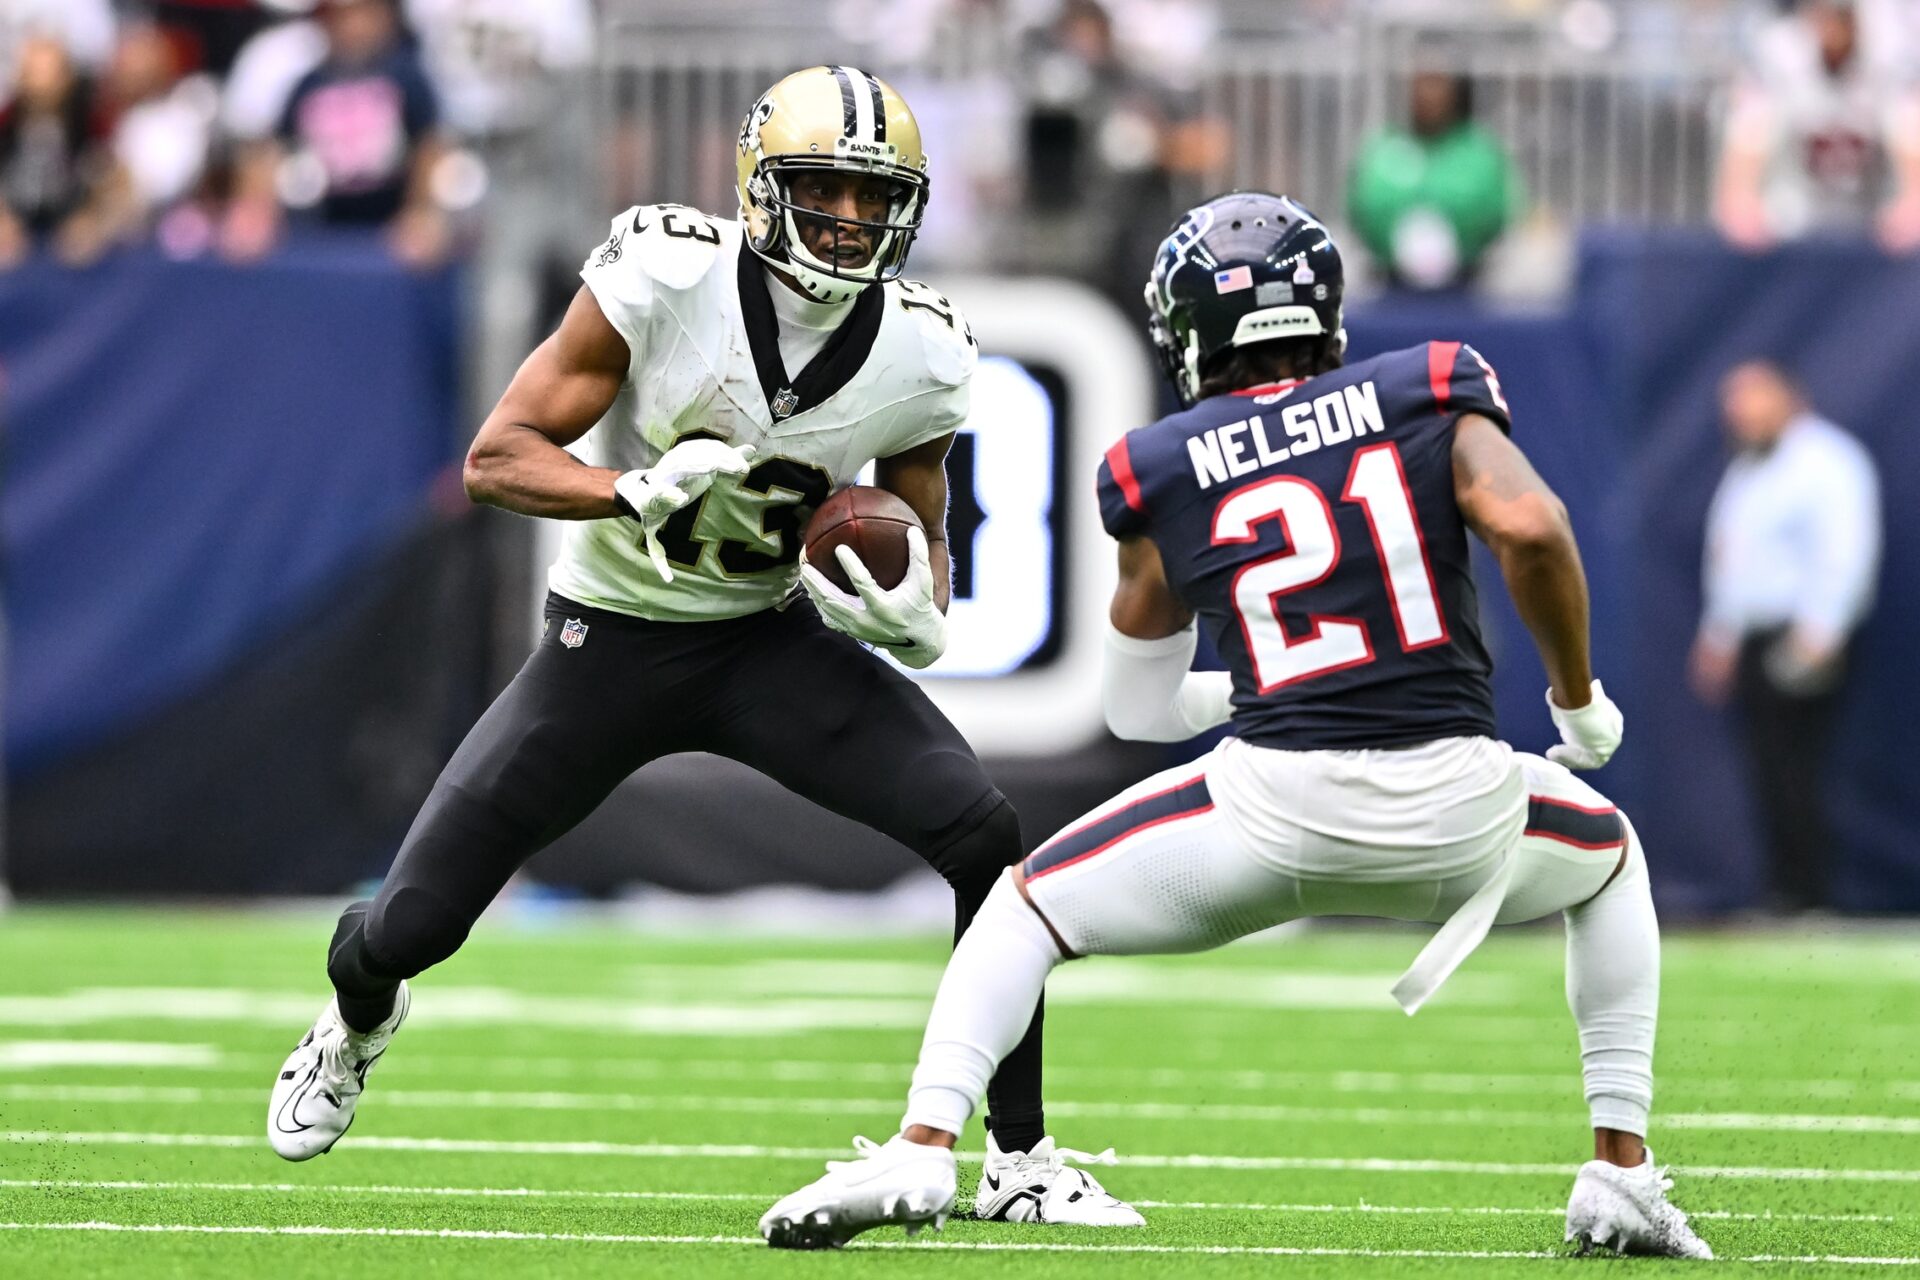 New Orleans Saints WR Michael Thomas (13) looks to make a move against the Houston Texans.